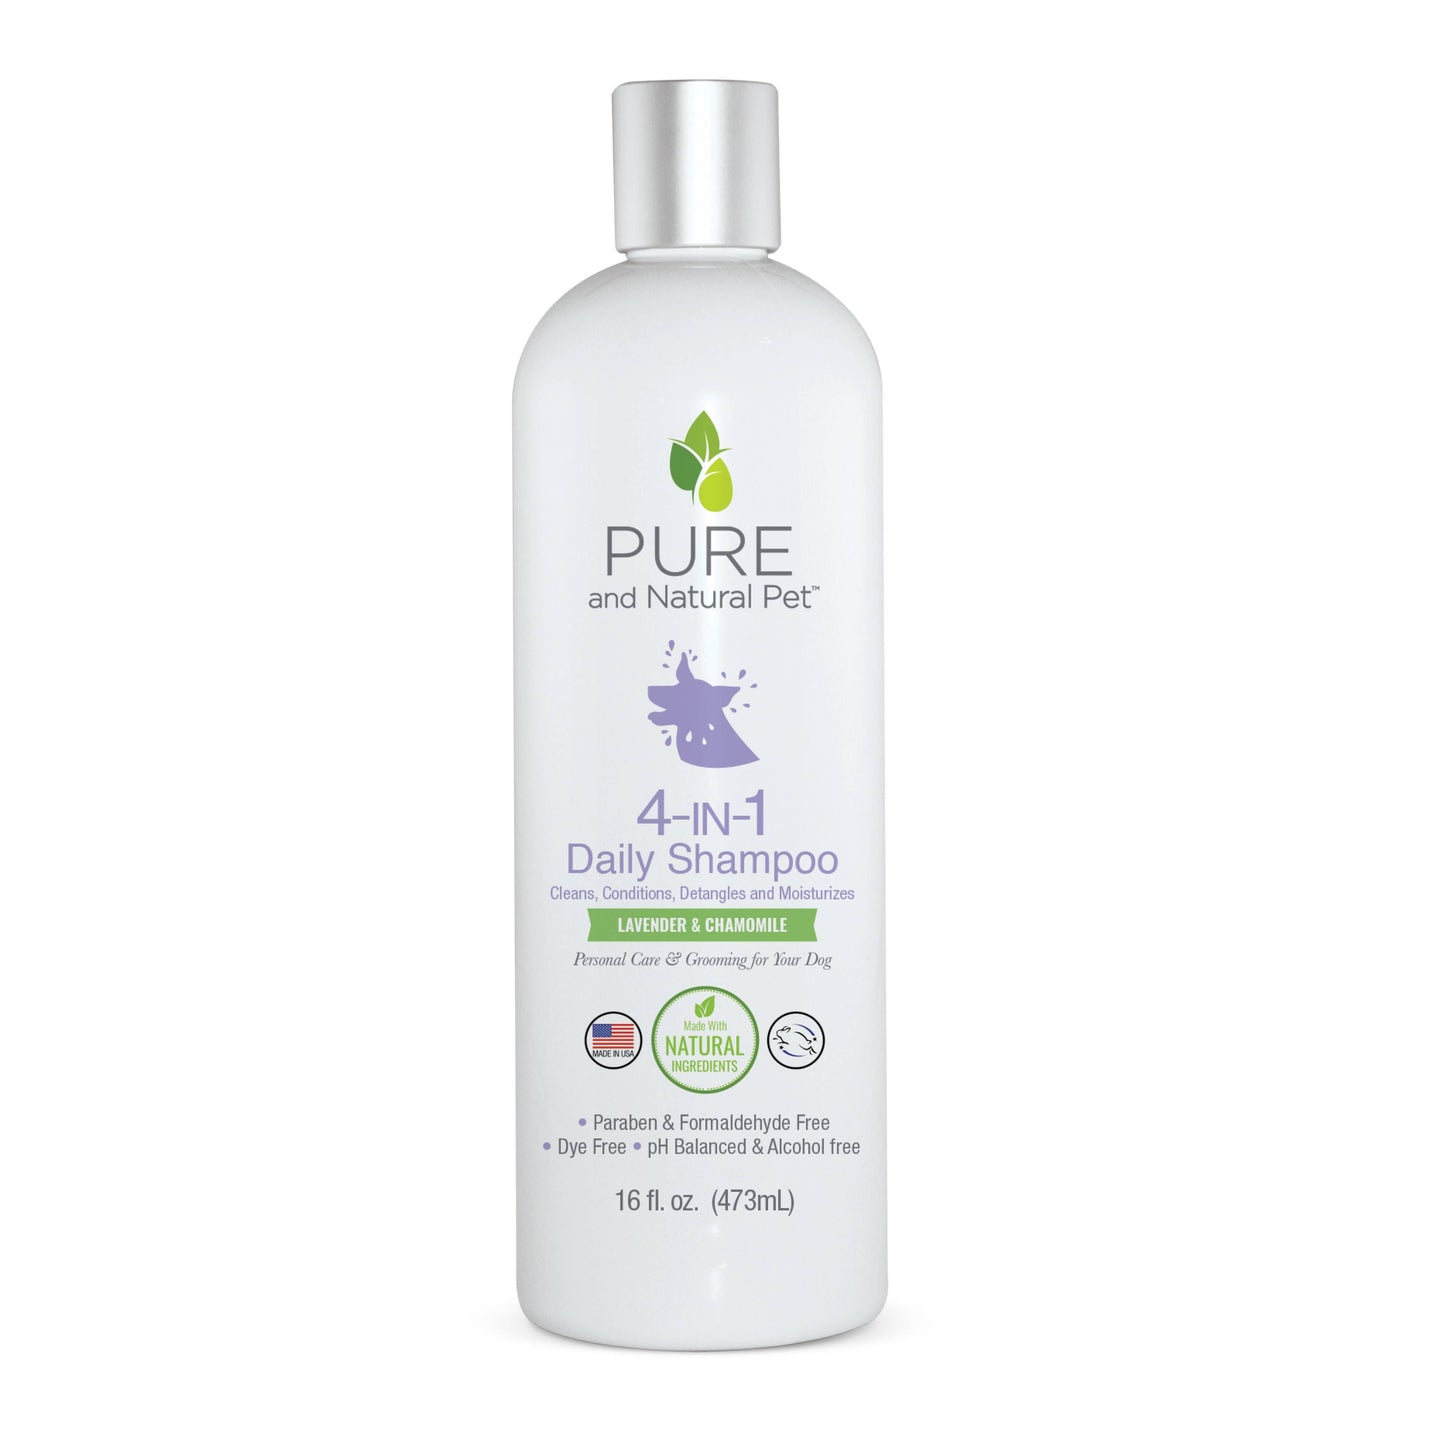 Pure and Natural Pet - 4-in-1 Daily Shampoo